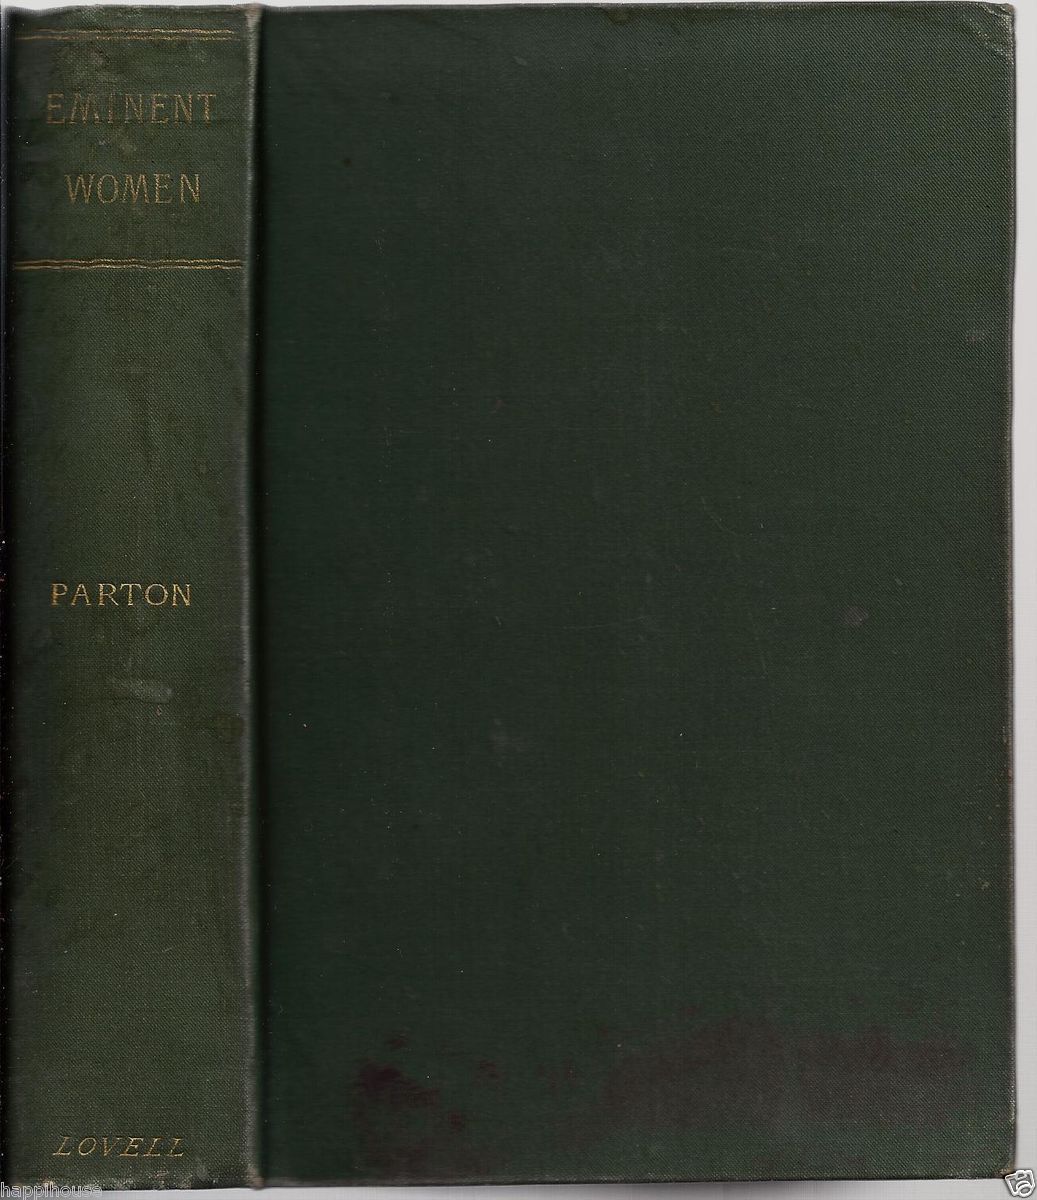  Women A Series of Sketches 1890 James Parton Illustrated